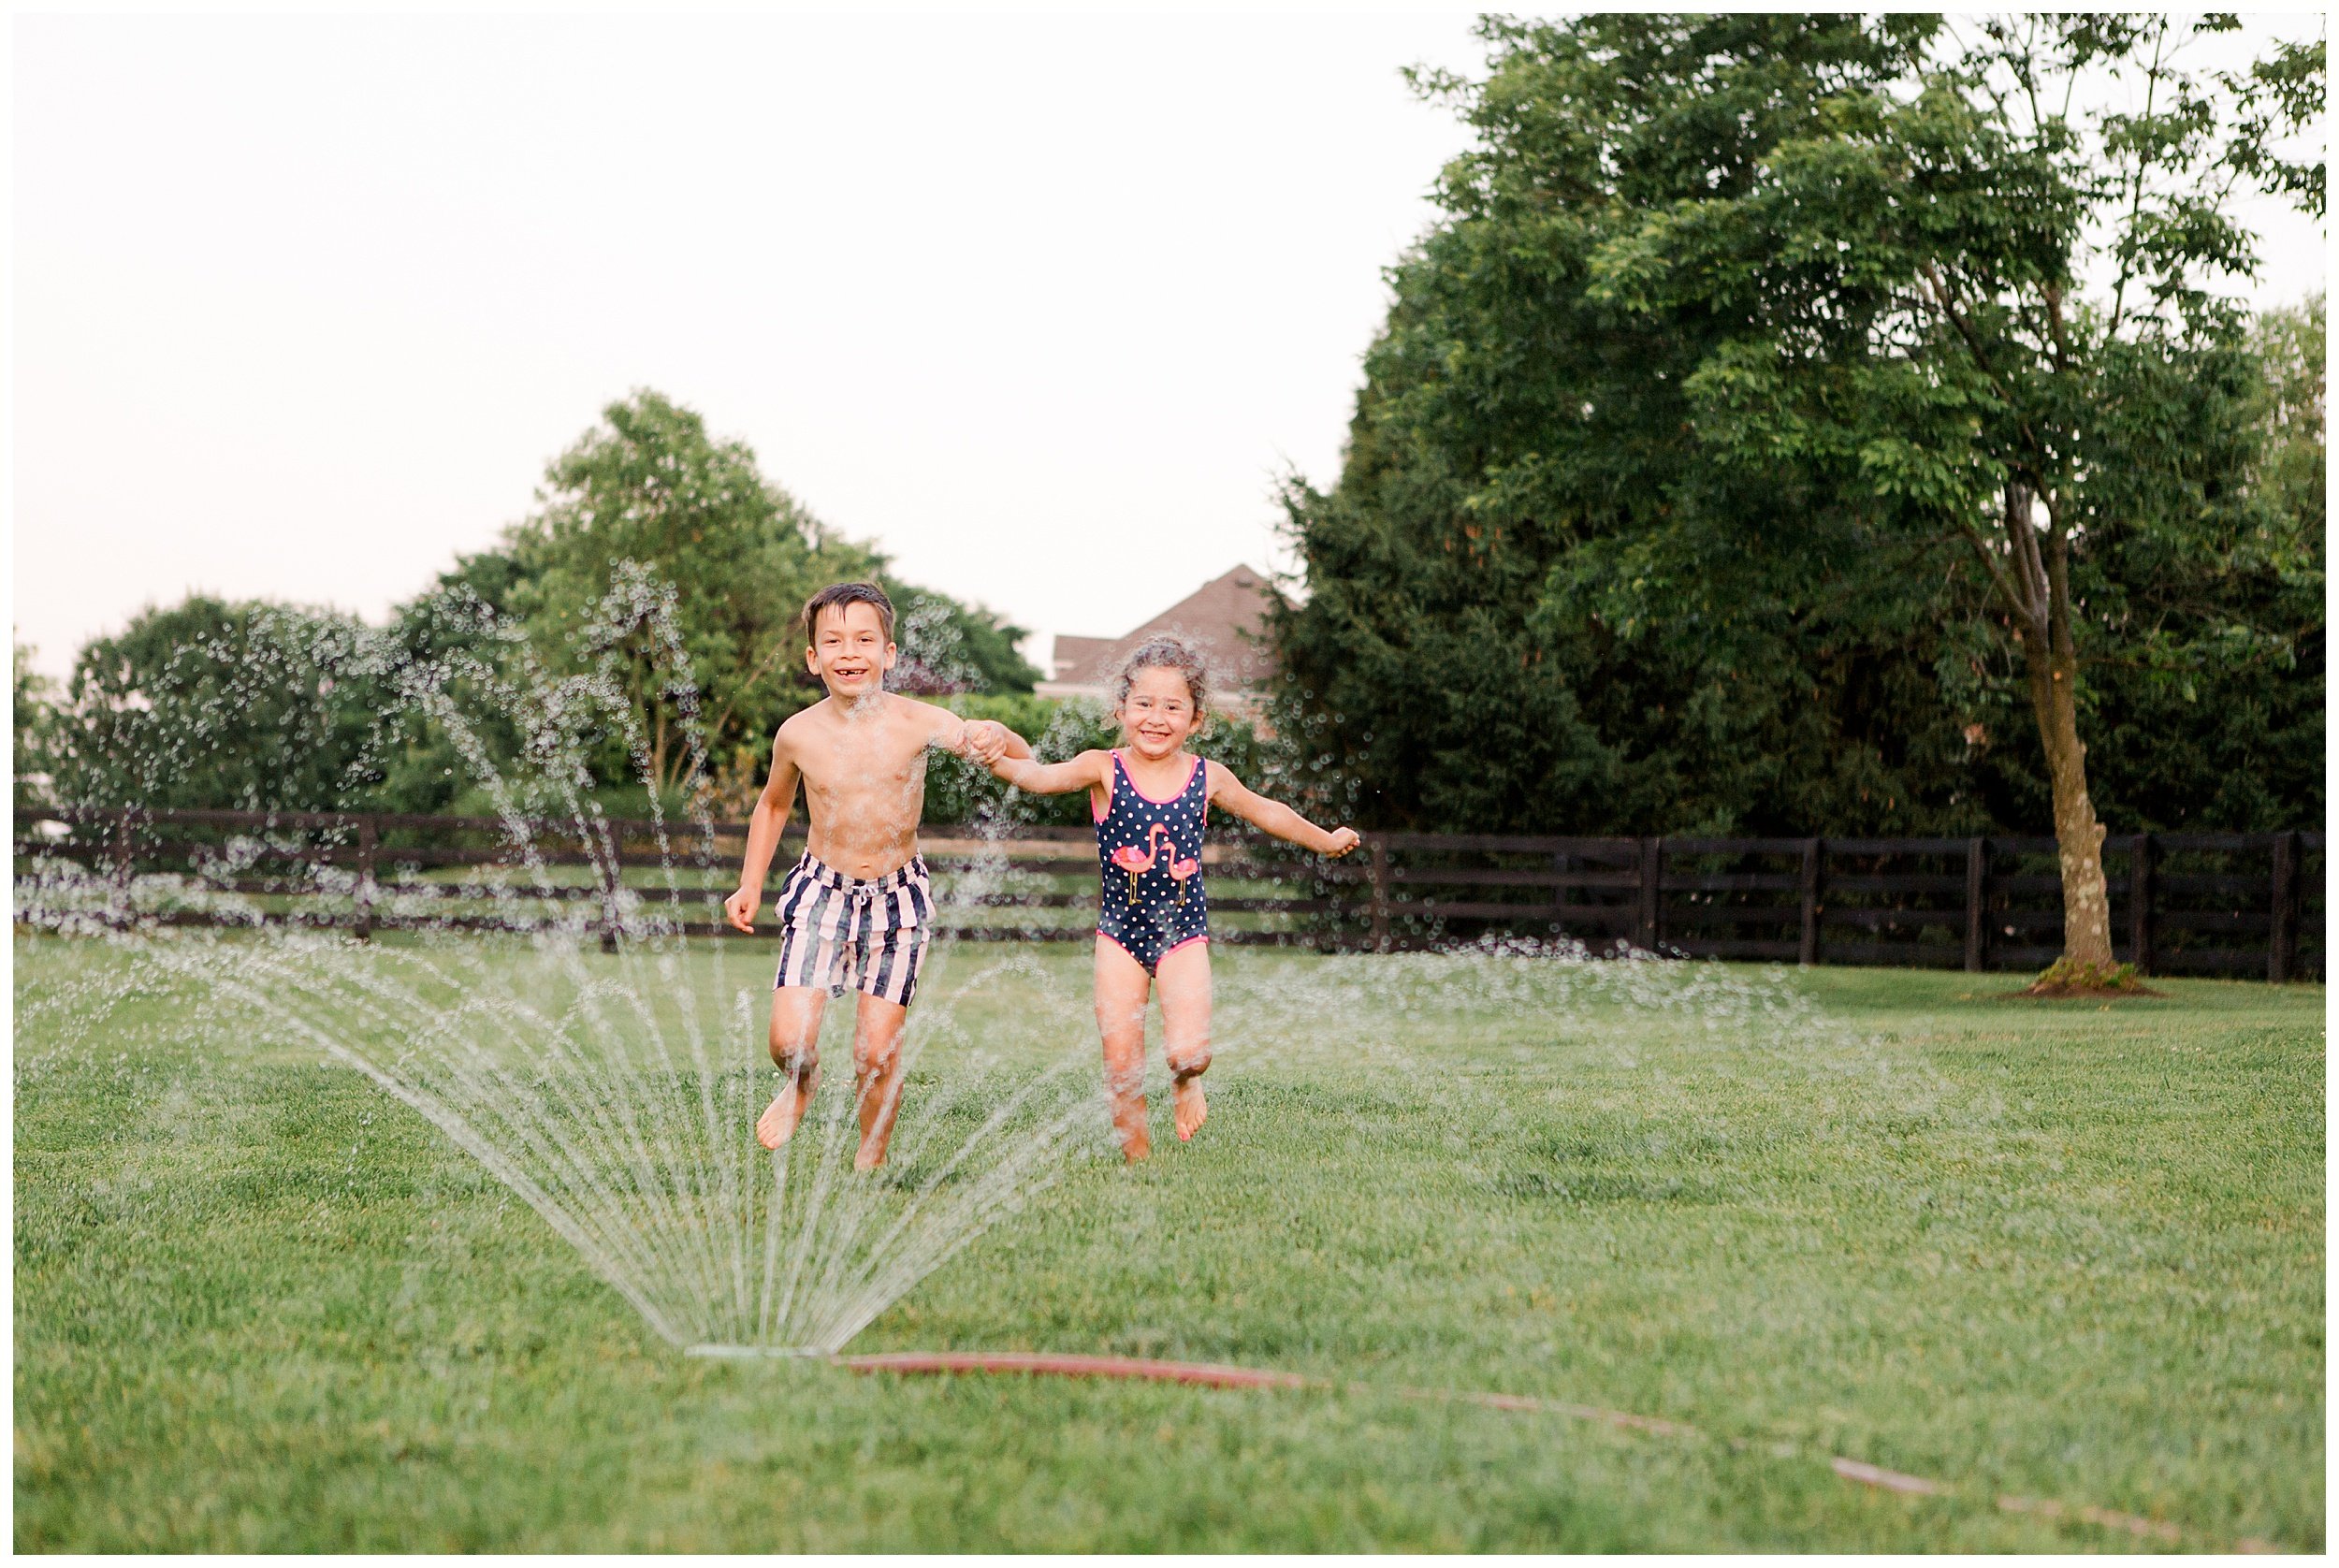  Boy and girl running through sprinklers. Summertime in Kentucky. Family photography by Priscilla Baierlein Photography. 